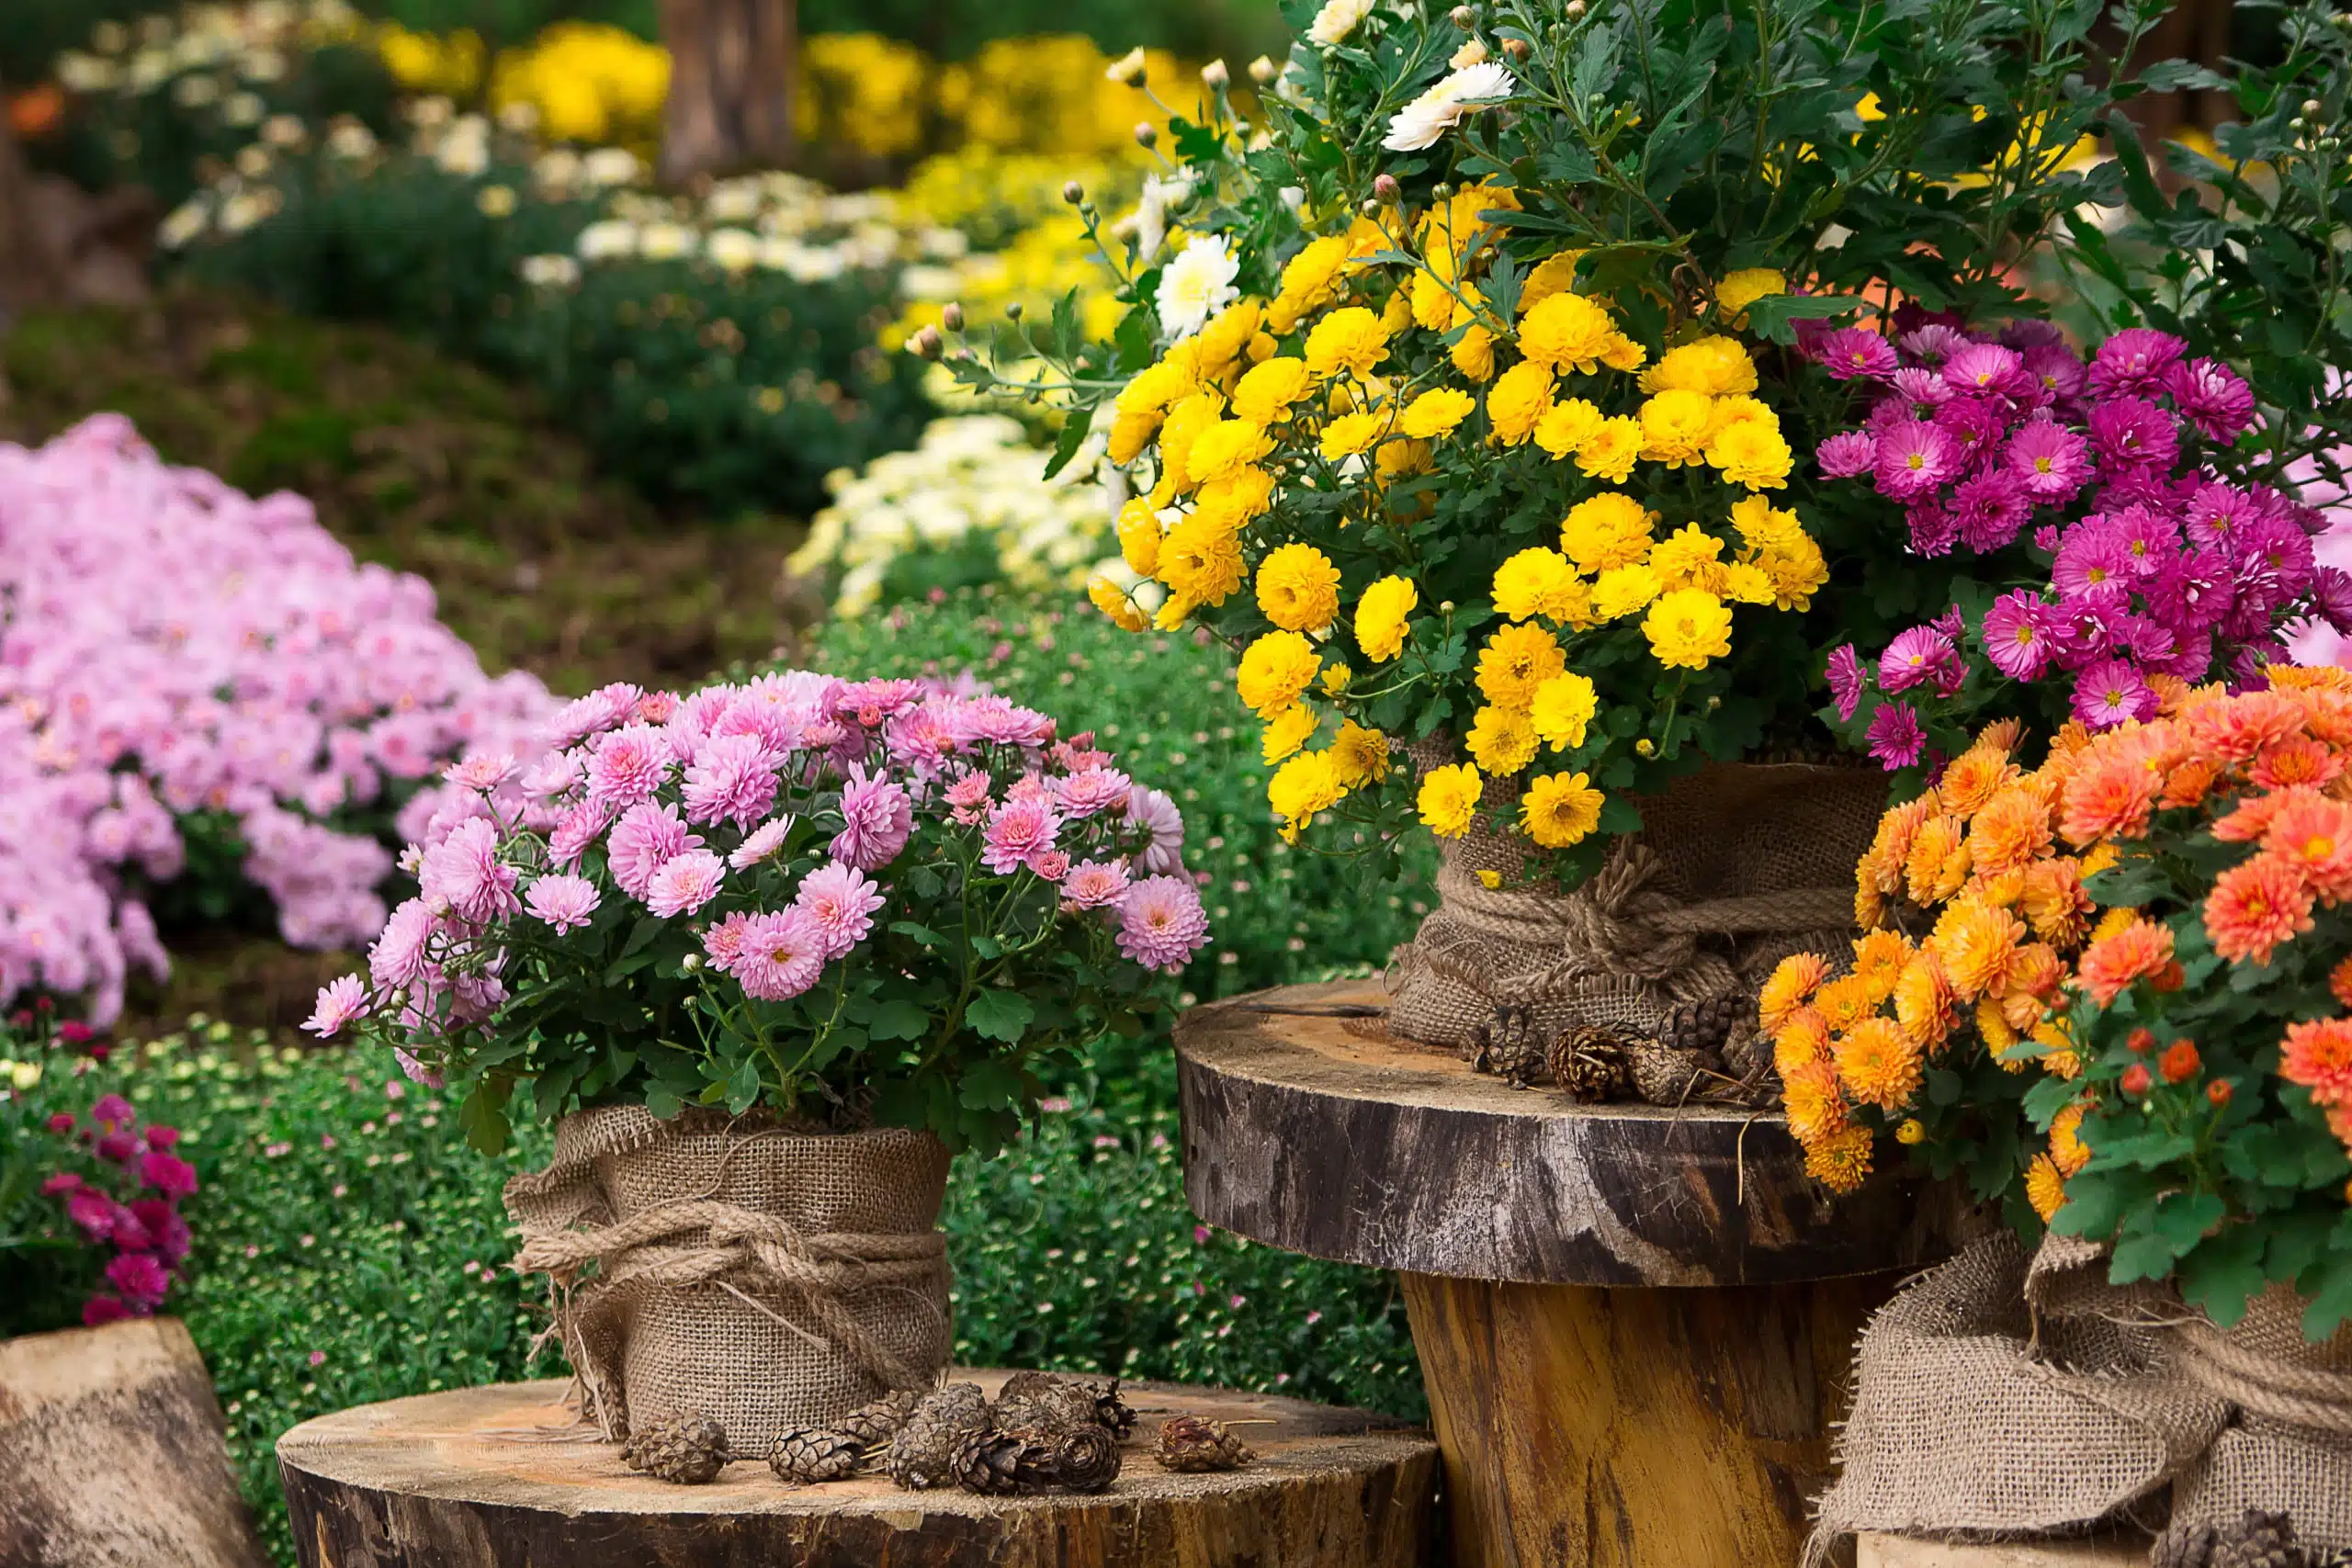 35 Inspirational Gardening Quotes And Famous Proverbs